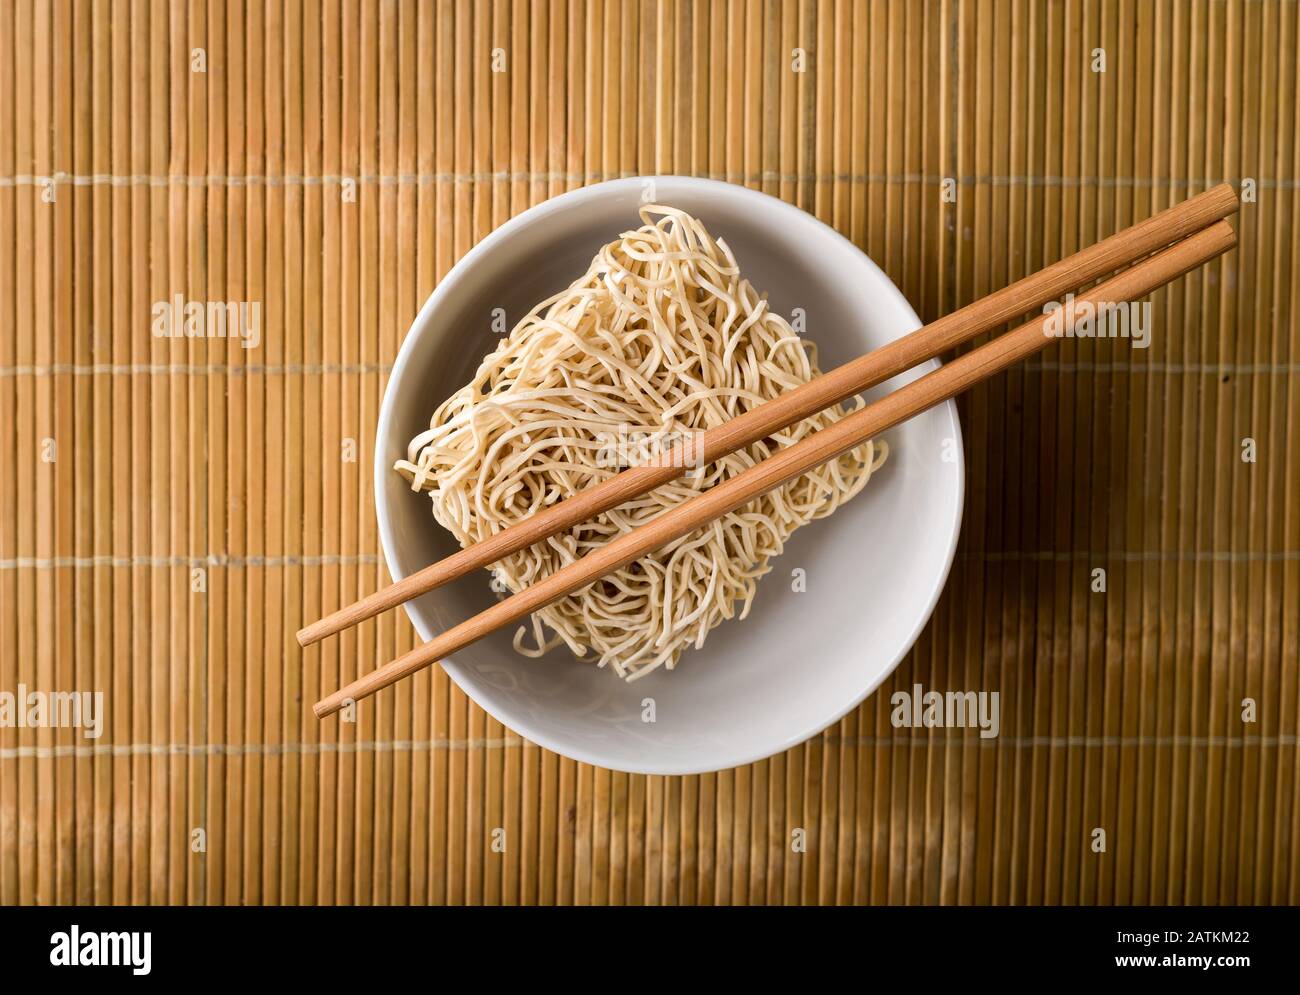 Chinese dried noodles in a bowl. Bamboo sticks. Asian cuisine. Stock Photo